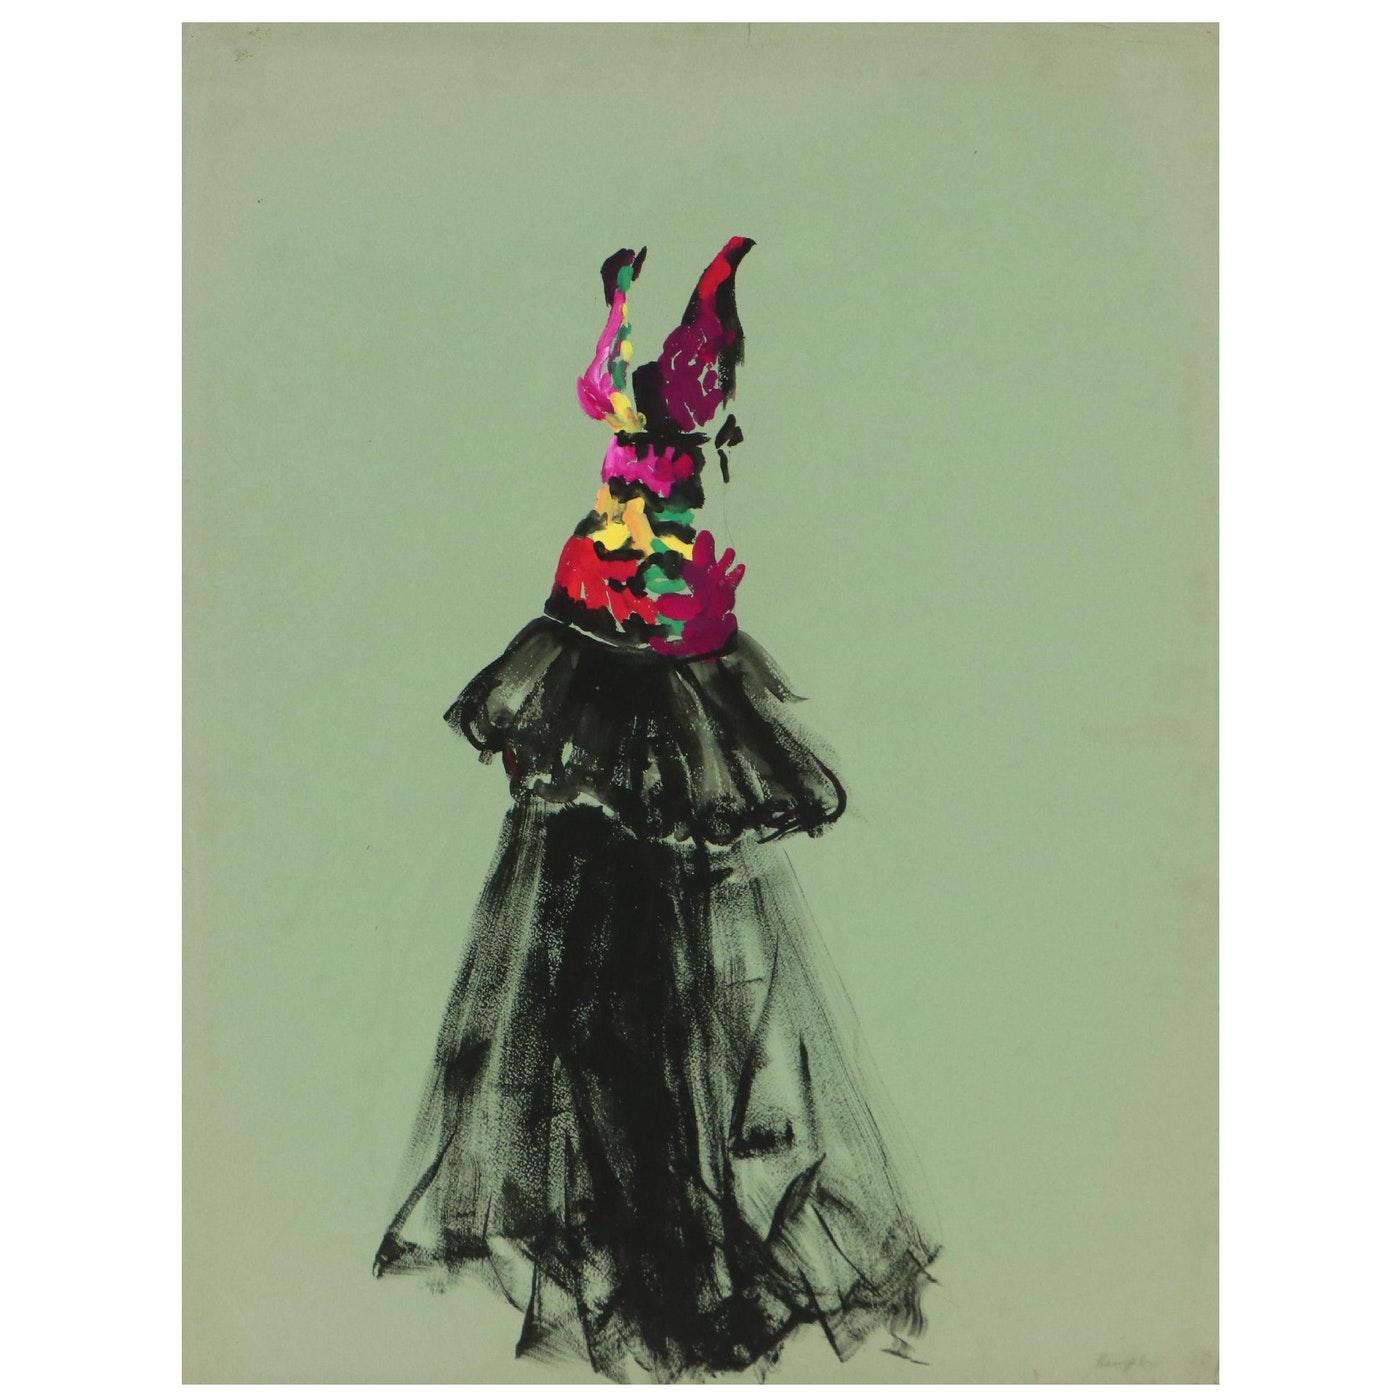 Beautiful fashion dress watercolor painting on paper.
Beautiful bold colors and very stylish.
Signed Hempler.

Measurements:
19.50 inches wide x 26 inches high x 0.1 thick.

Not Framed.

Orval Frederick Hempler (1915 – 1994). Orval was born